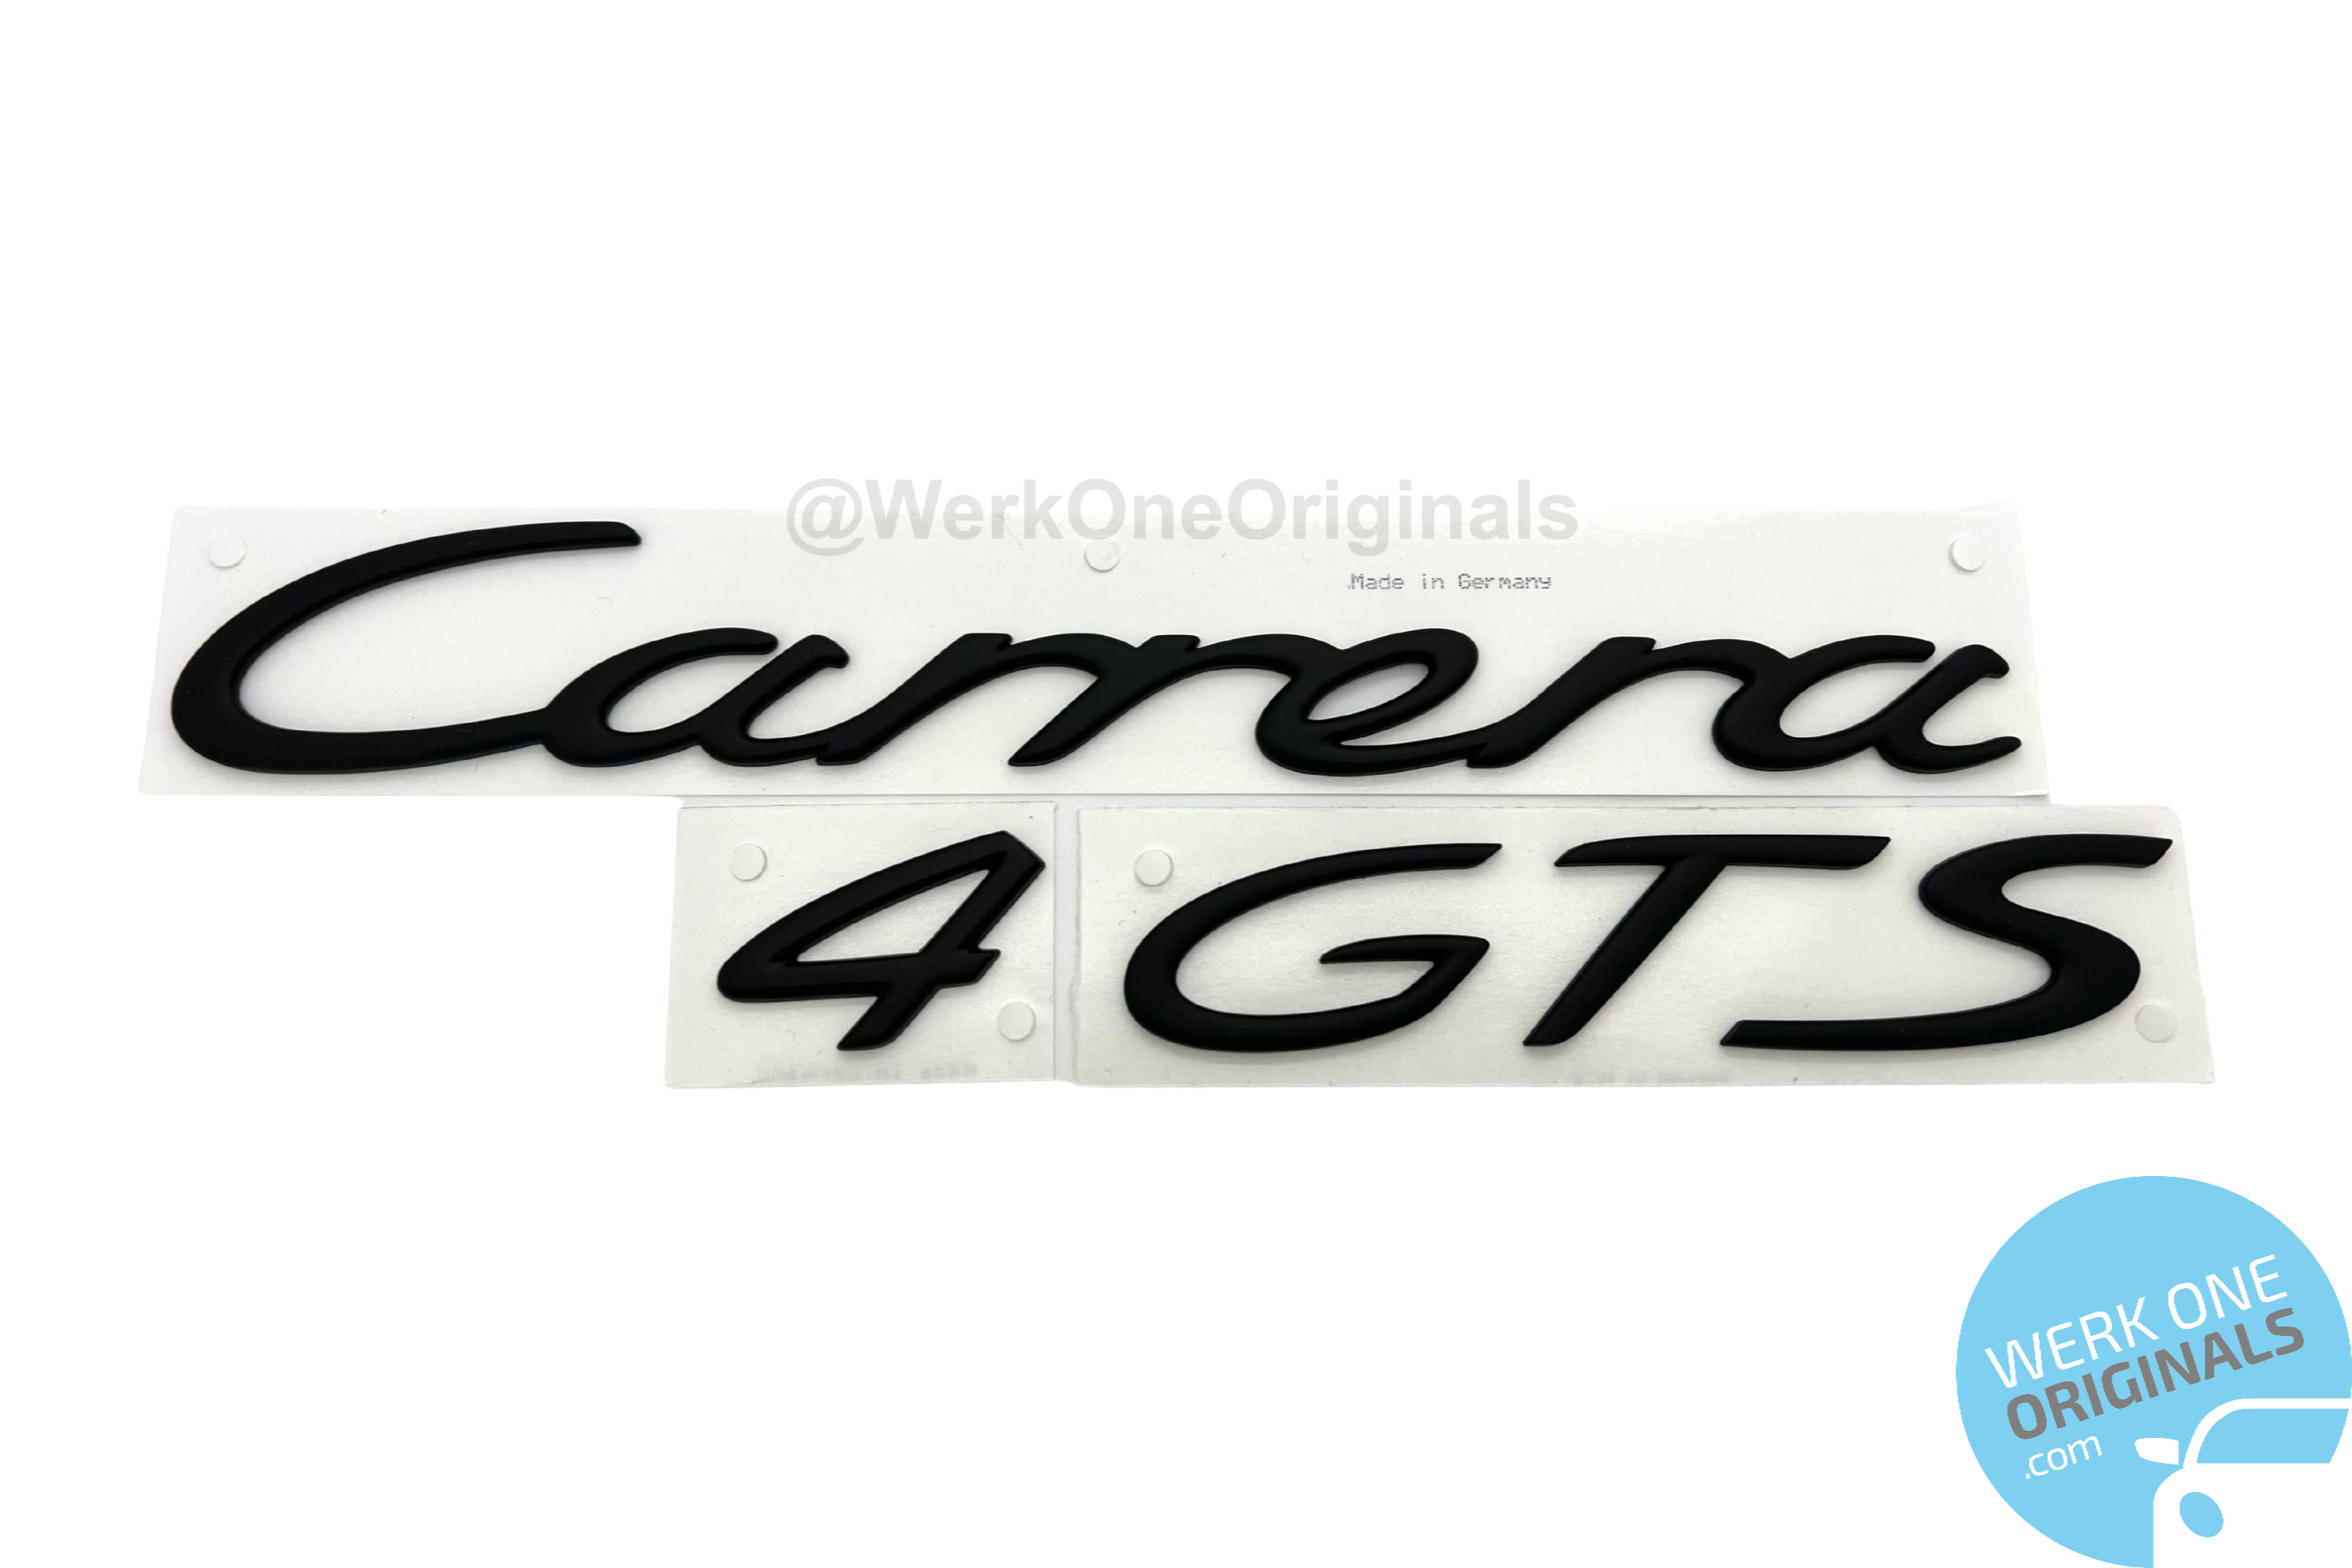 Porsche Official 'Carrera 4 GTS' Rear Badge Decal in Matte Black for 911 Type 997 Carrera 4 GTS Models